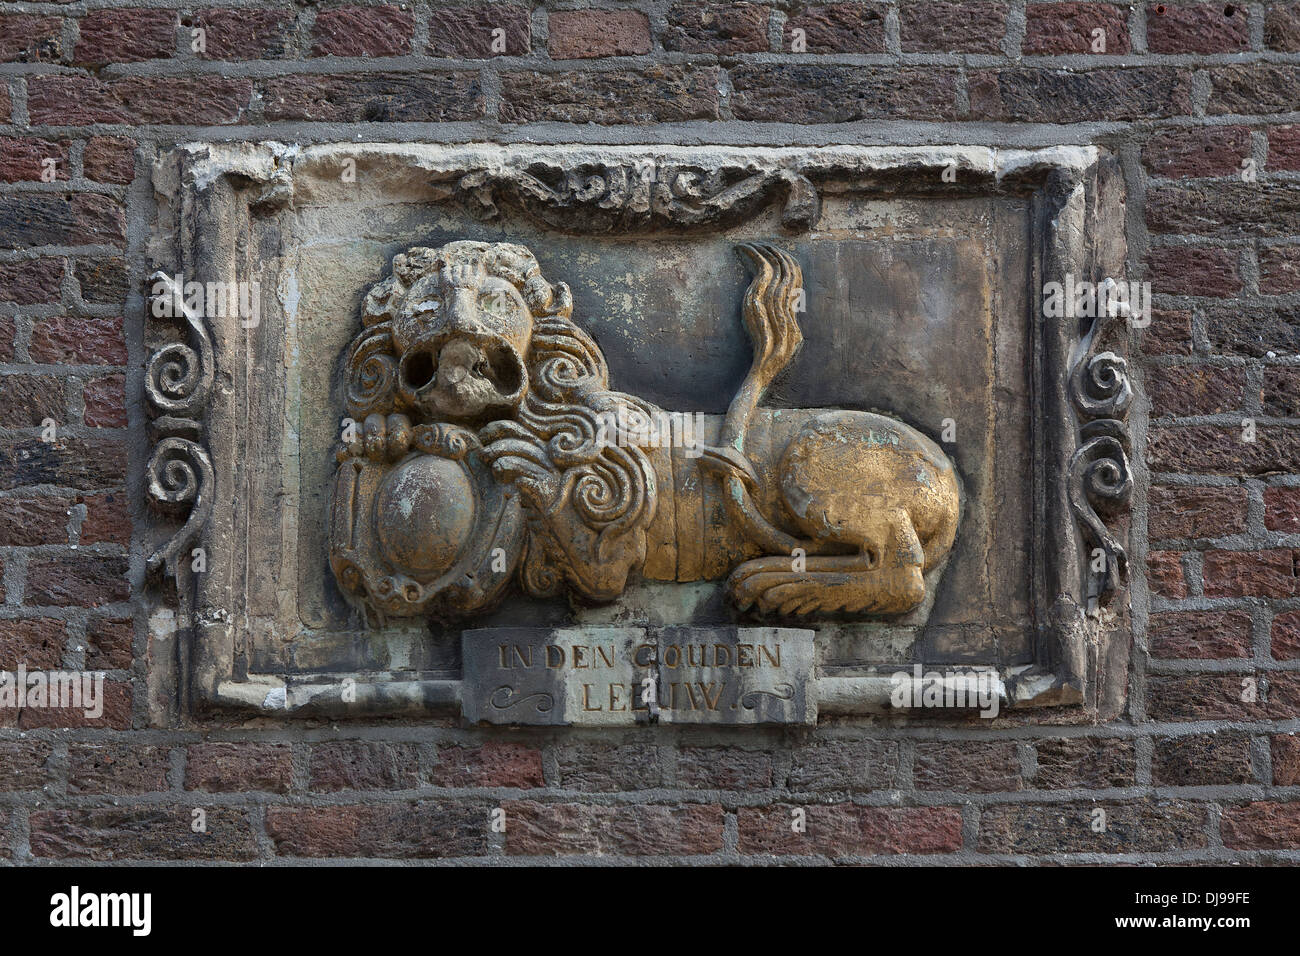 Sculpture on the facade of a house in Maastricht, Netherlands Stock Photo